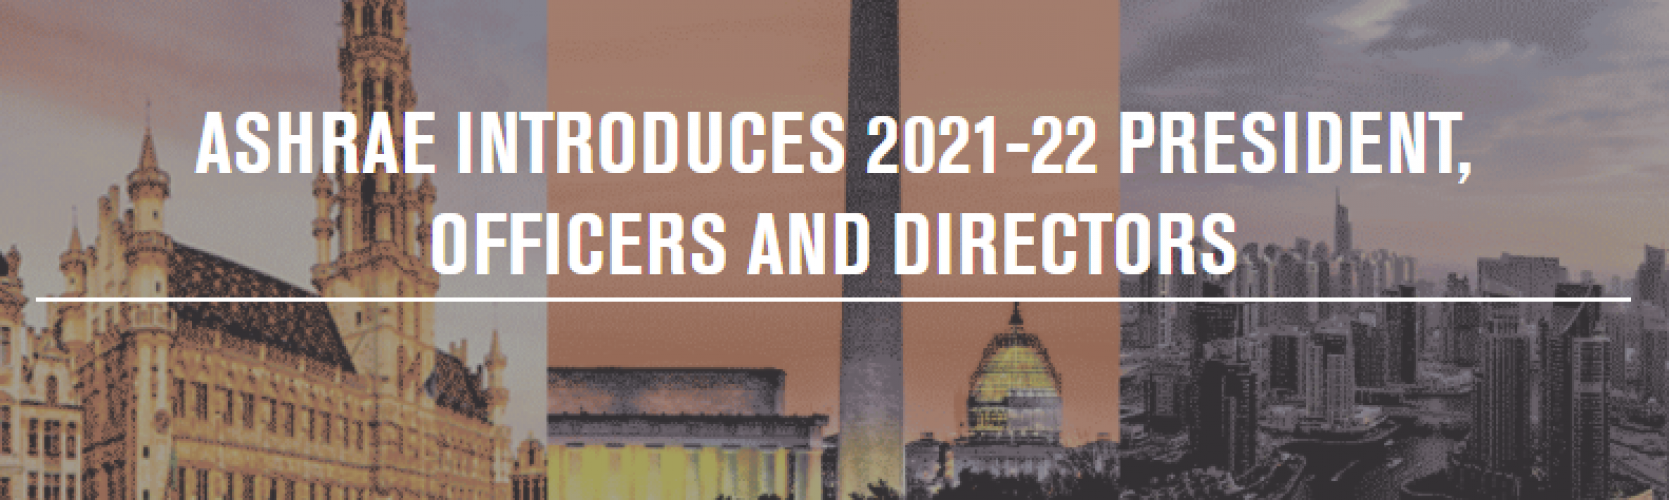 ASHRAE Introduces 2021-22 President, Officers and Directors